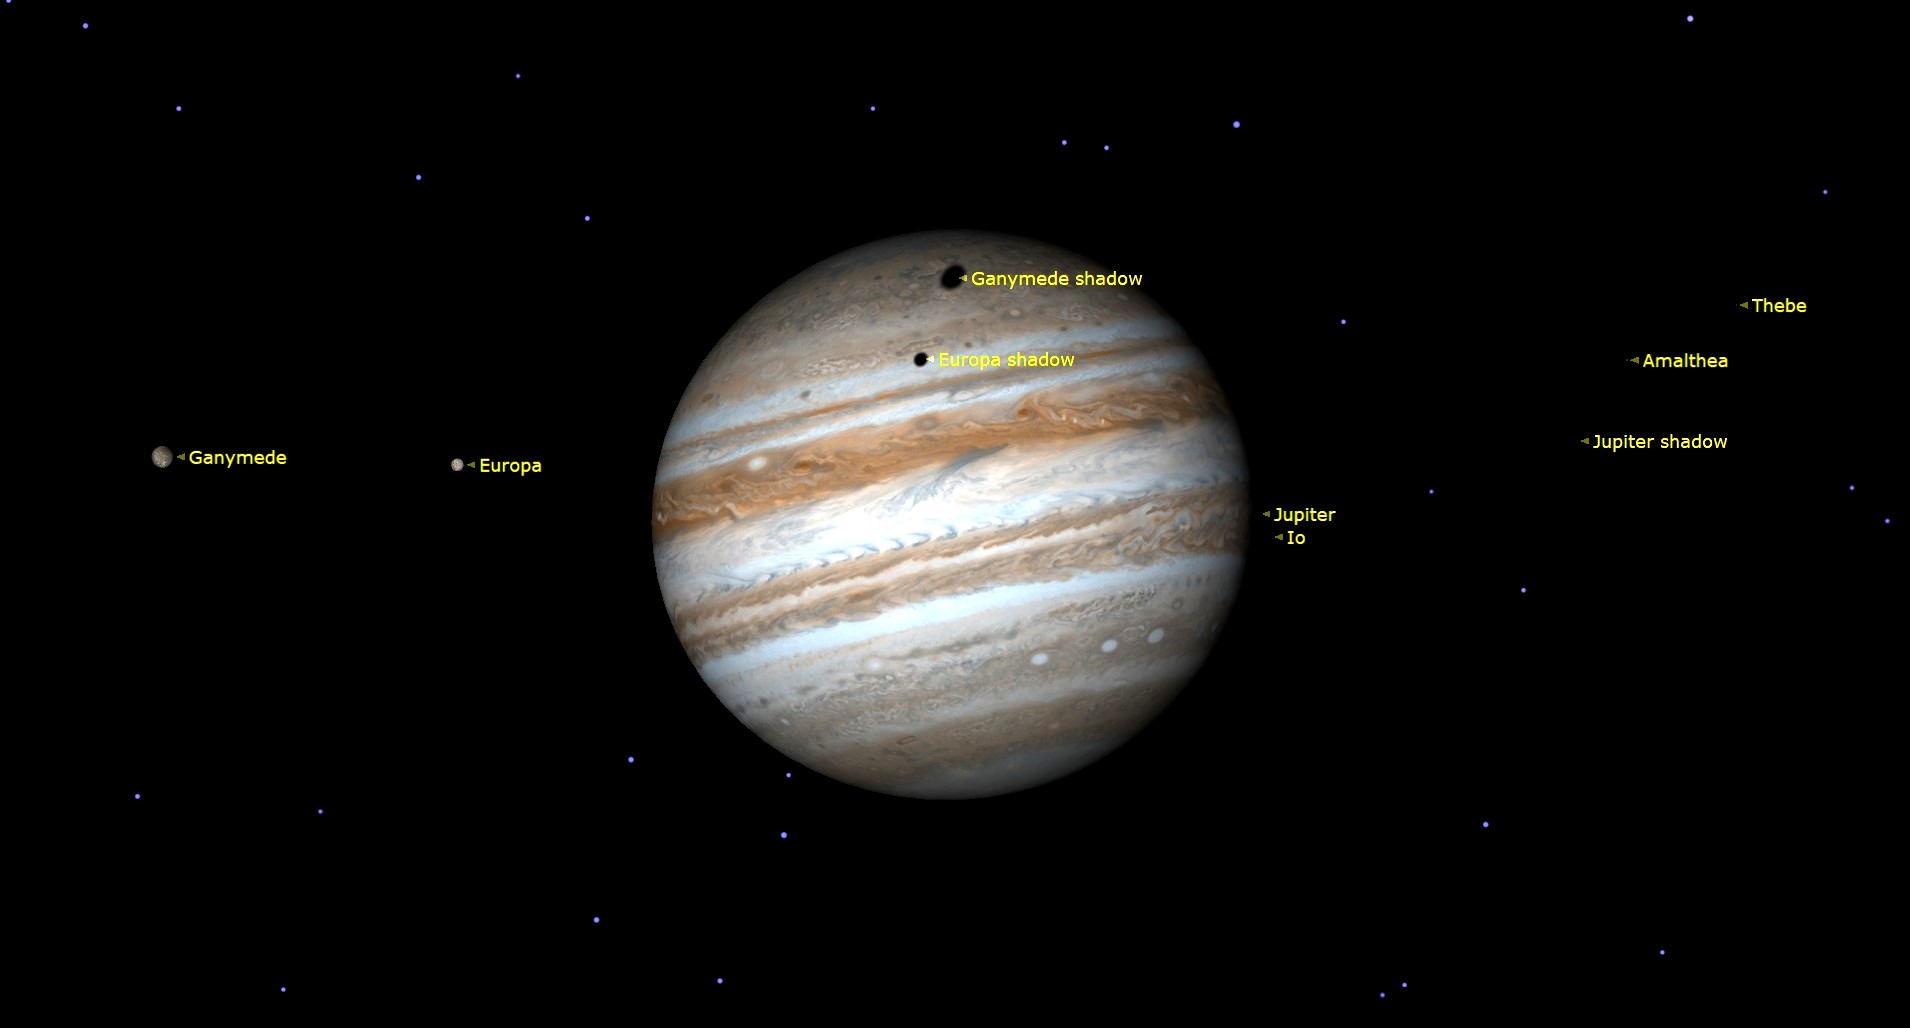 From time to time, the small round black shadows cast by Jupiter's four Galilean moons become visible in amateur telescopes as they cross (or transit) the planet's disk. On Monday, March 25, observers in North America can see two of those shadows on Jupiter at the same time. At 4:06 a.m. EDT, Europa's shadow will join Ganymede's shadow already in transit. The duo will cross Jupiter together for almost two hours until Ganymede's shadow moves off the planet at 6:07 a.m. EDT. Europa's shadow will continue to transit for another 30 minutes.